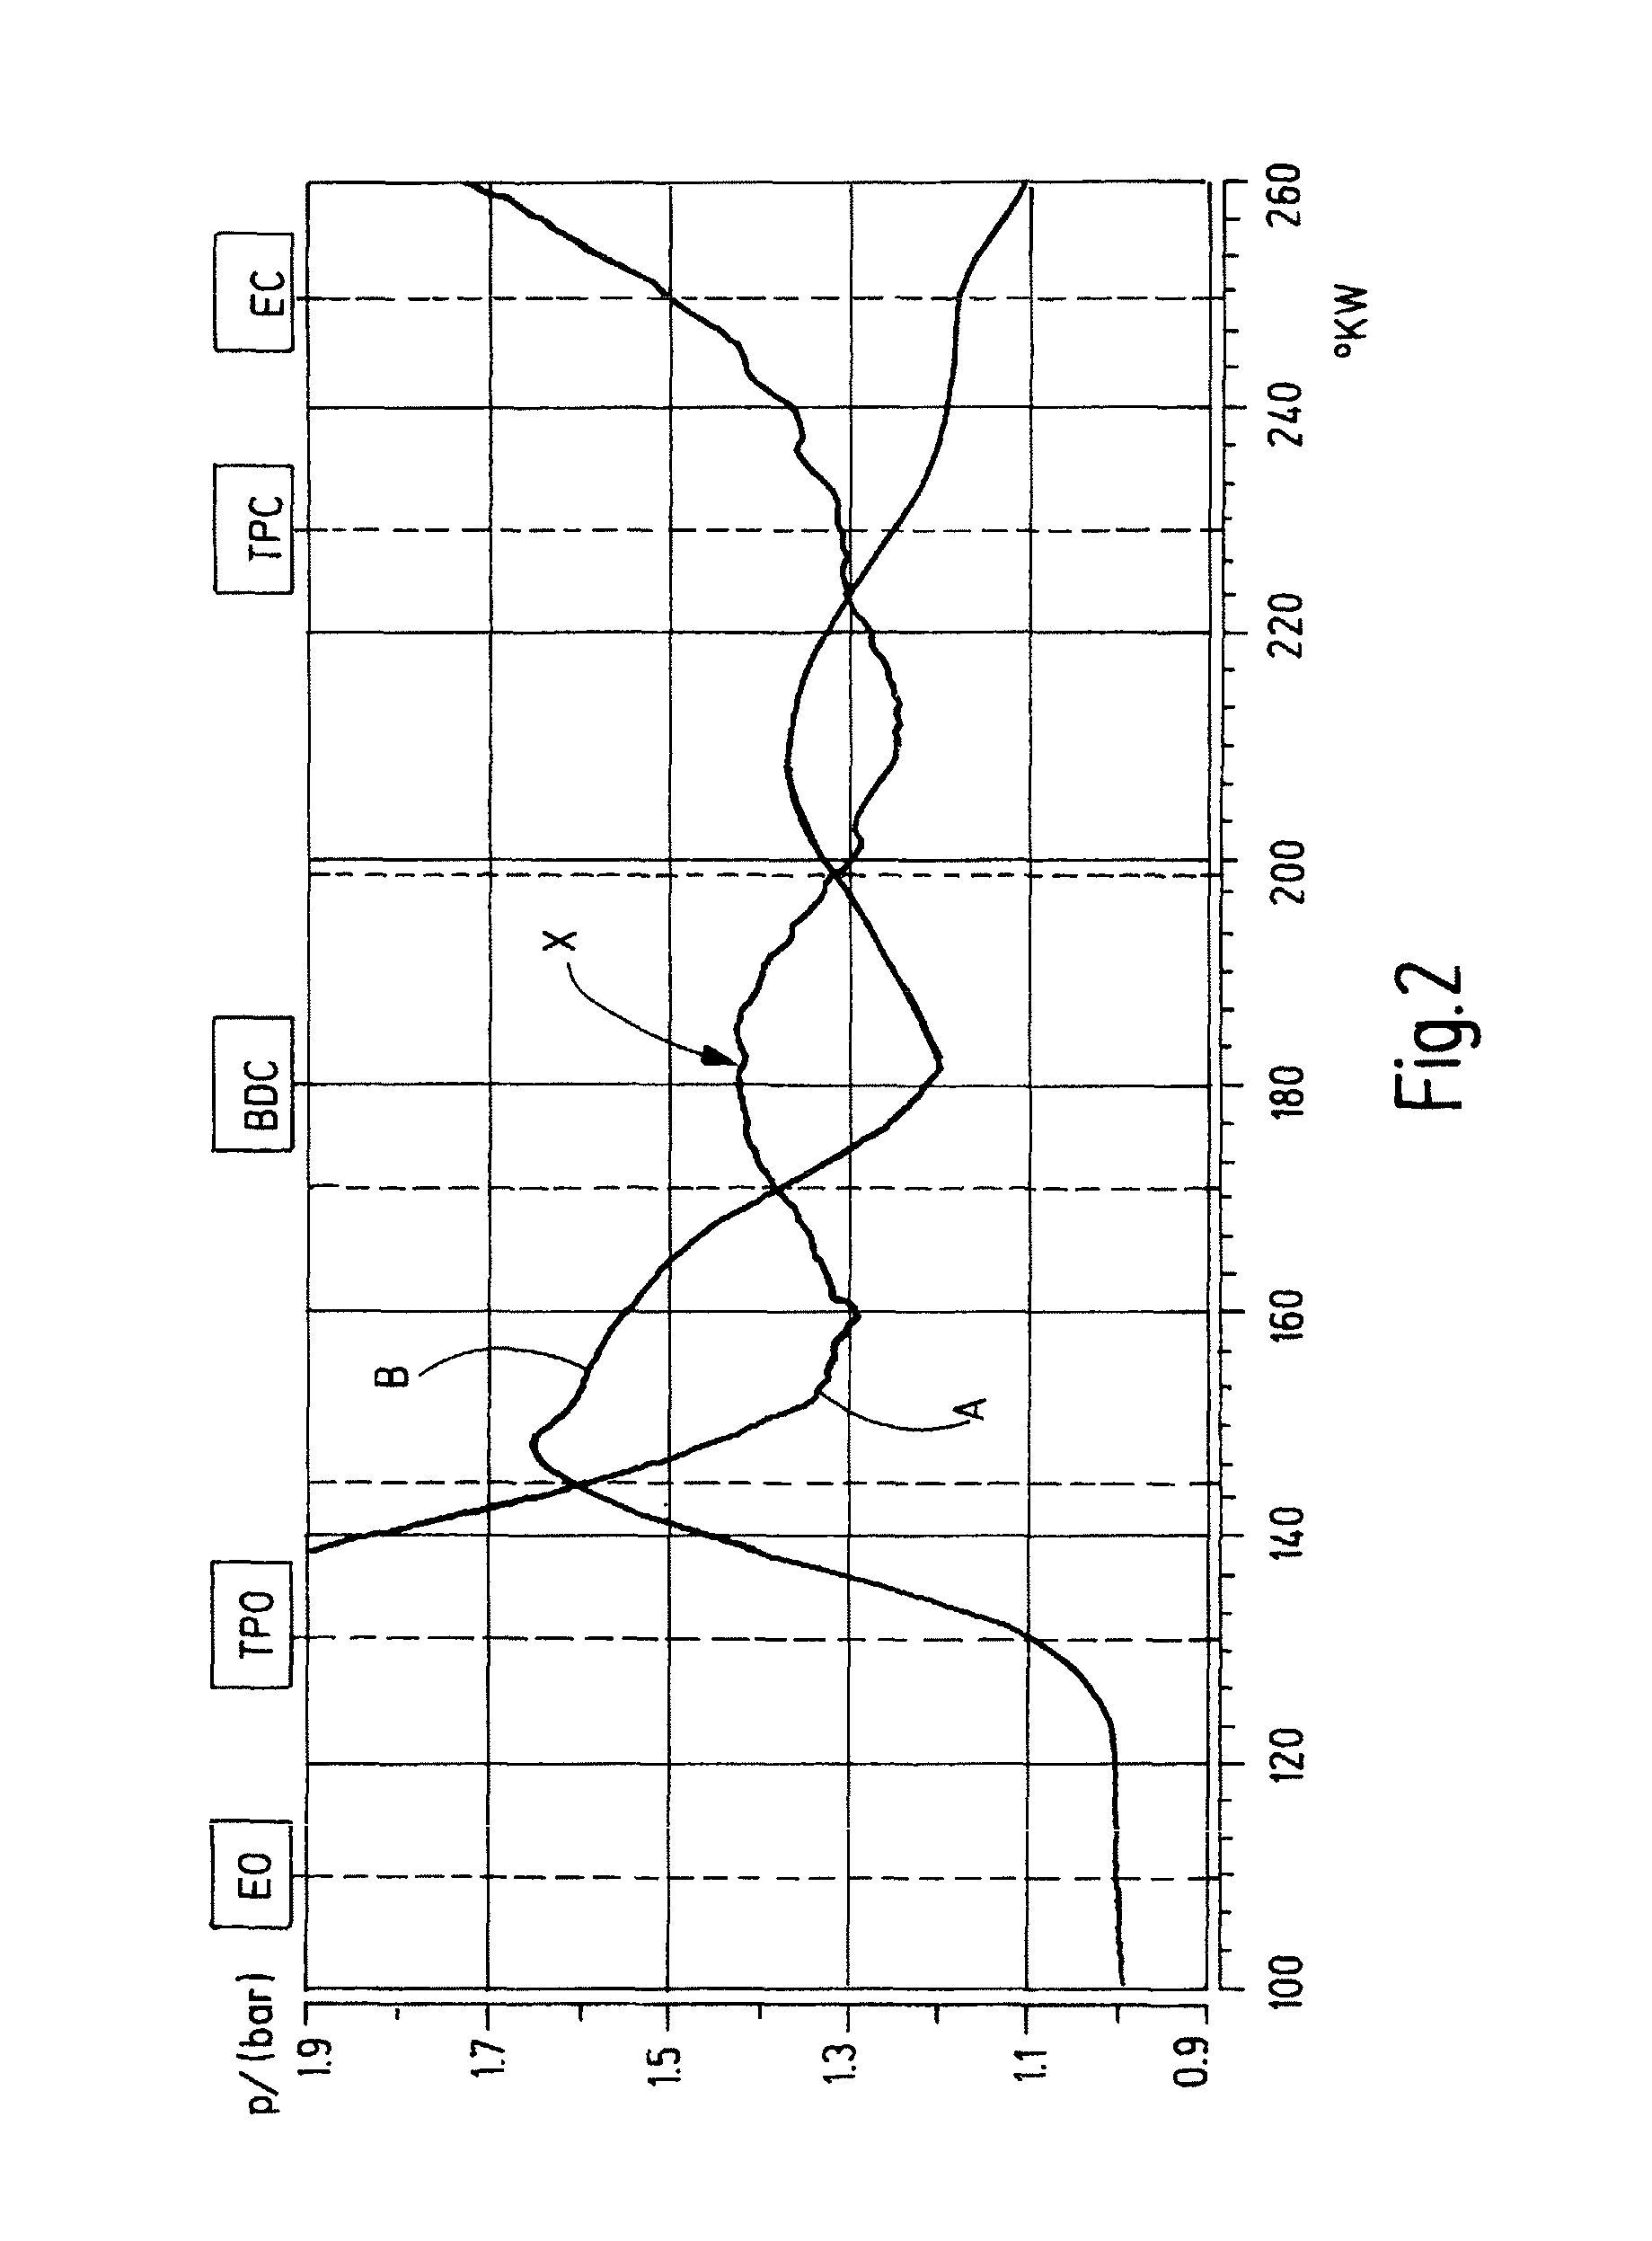 Two-stroke engine comprising a muffler